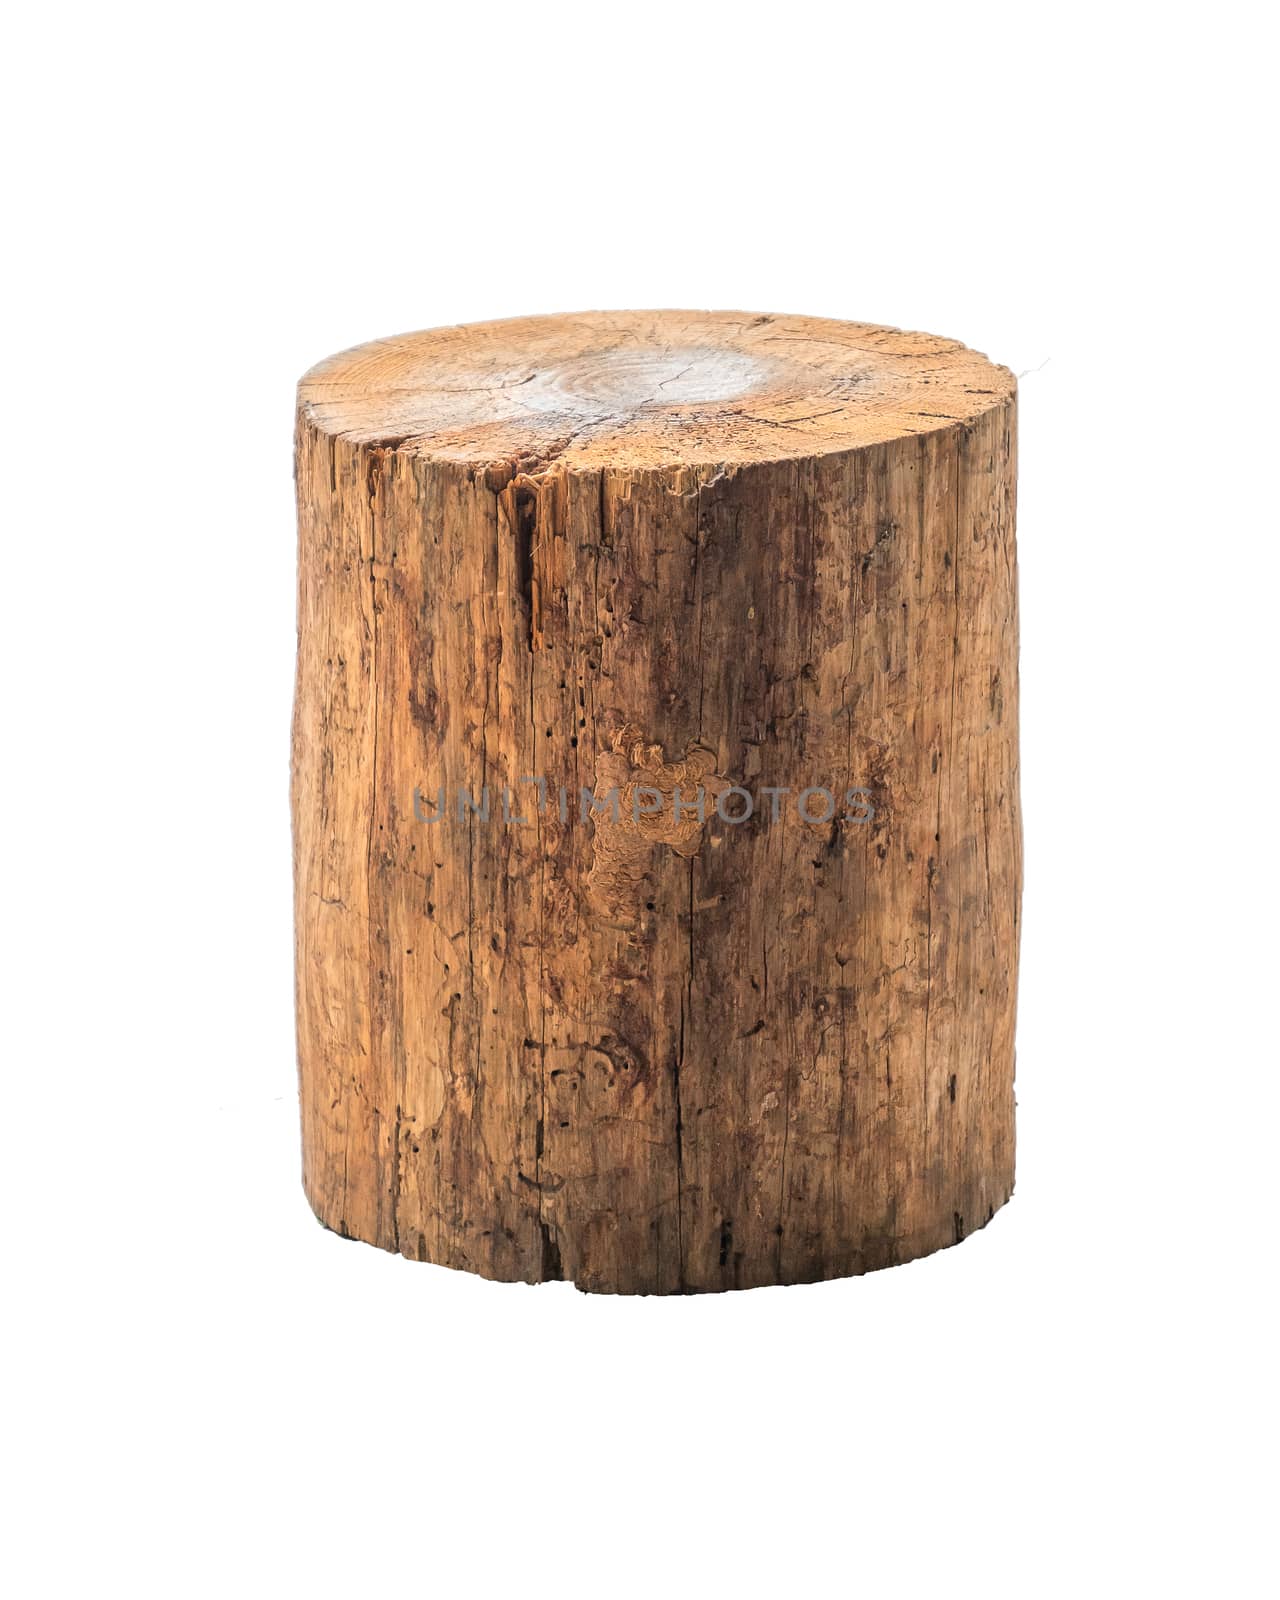 Isolated grunge log stool or chair craft artisan handmade furniture. by Tanarch